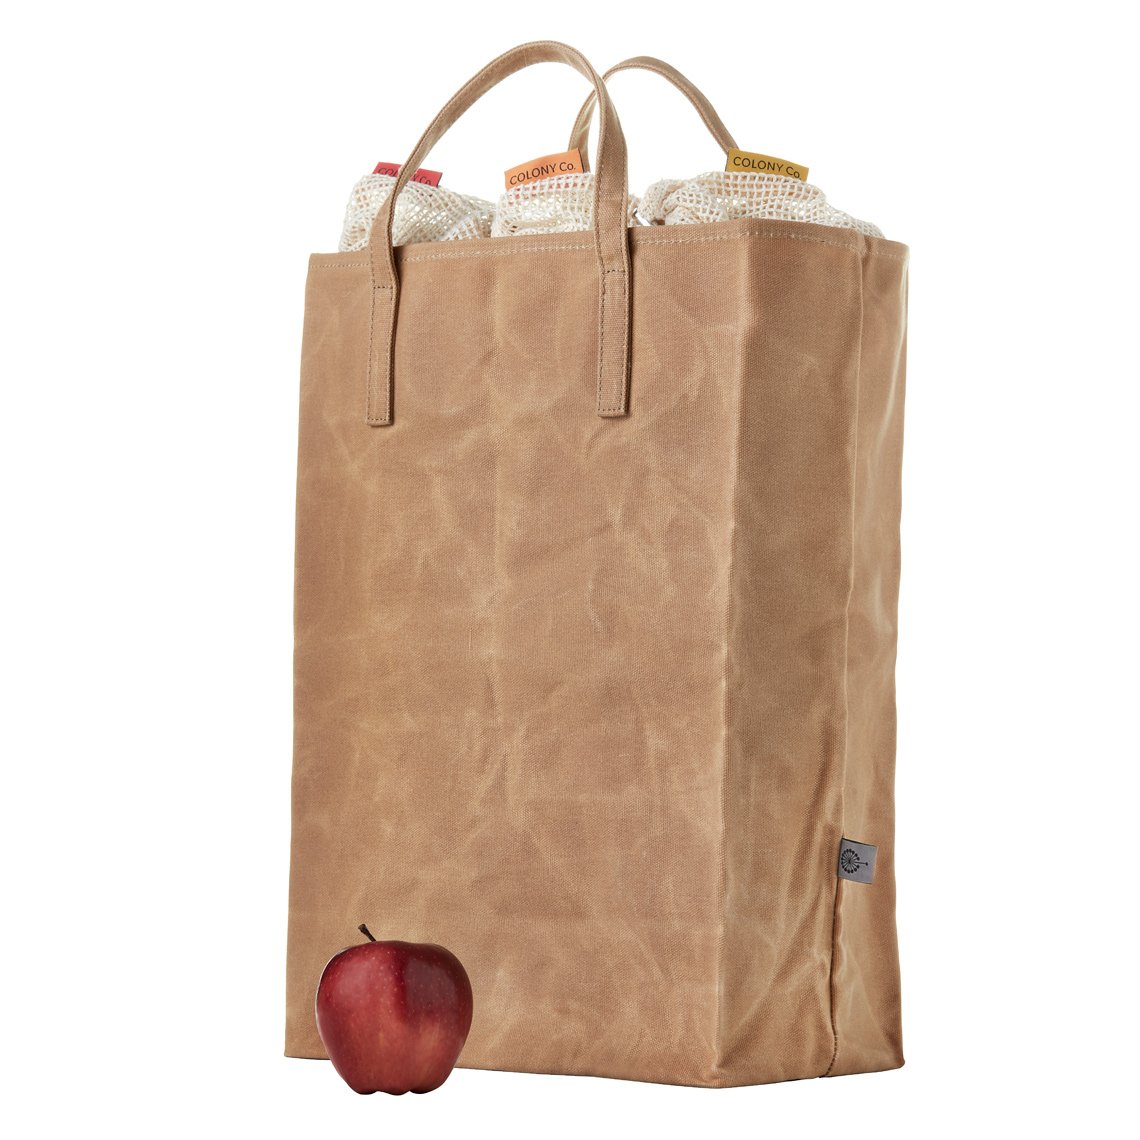 Using Reusable Tote Bags for Business Sends a Positive Message to Customers